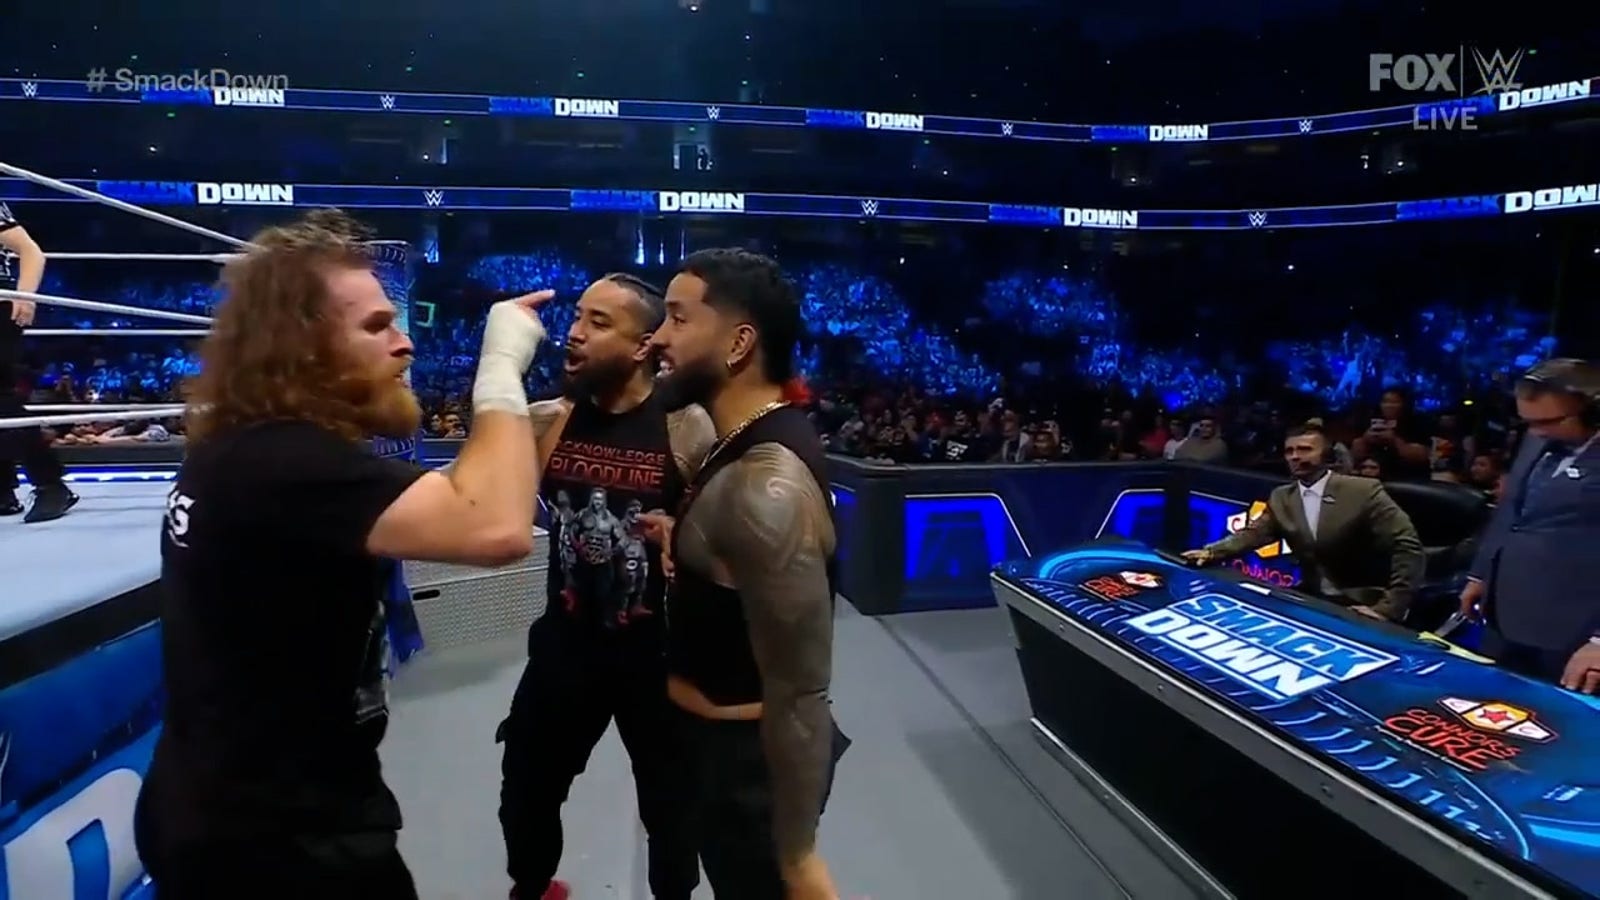 Sami Zayn joined it with Jey Uso before falling to Ricochet on SmackDown